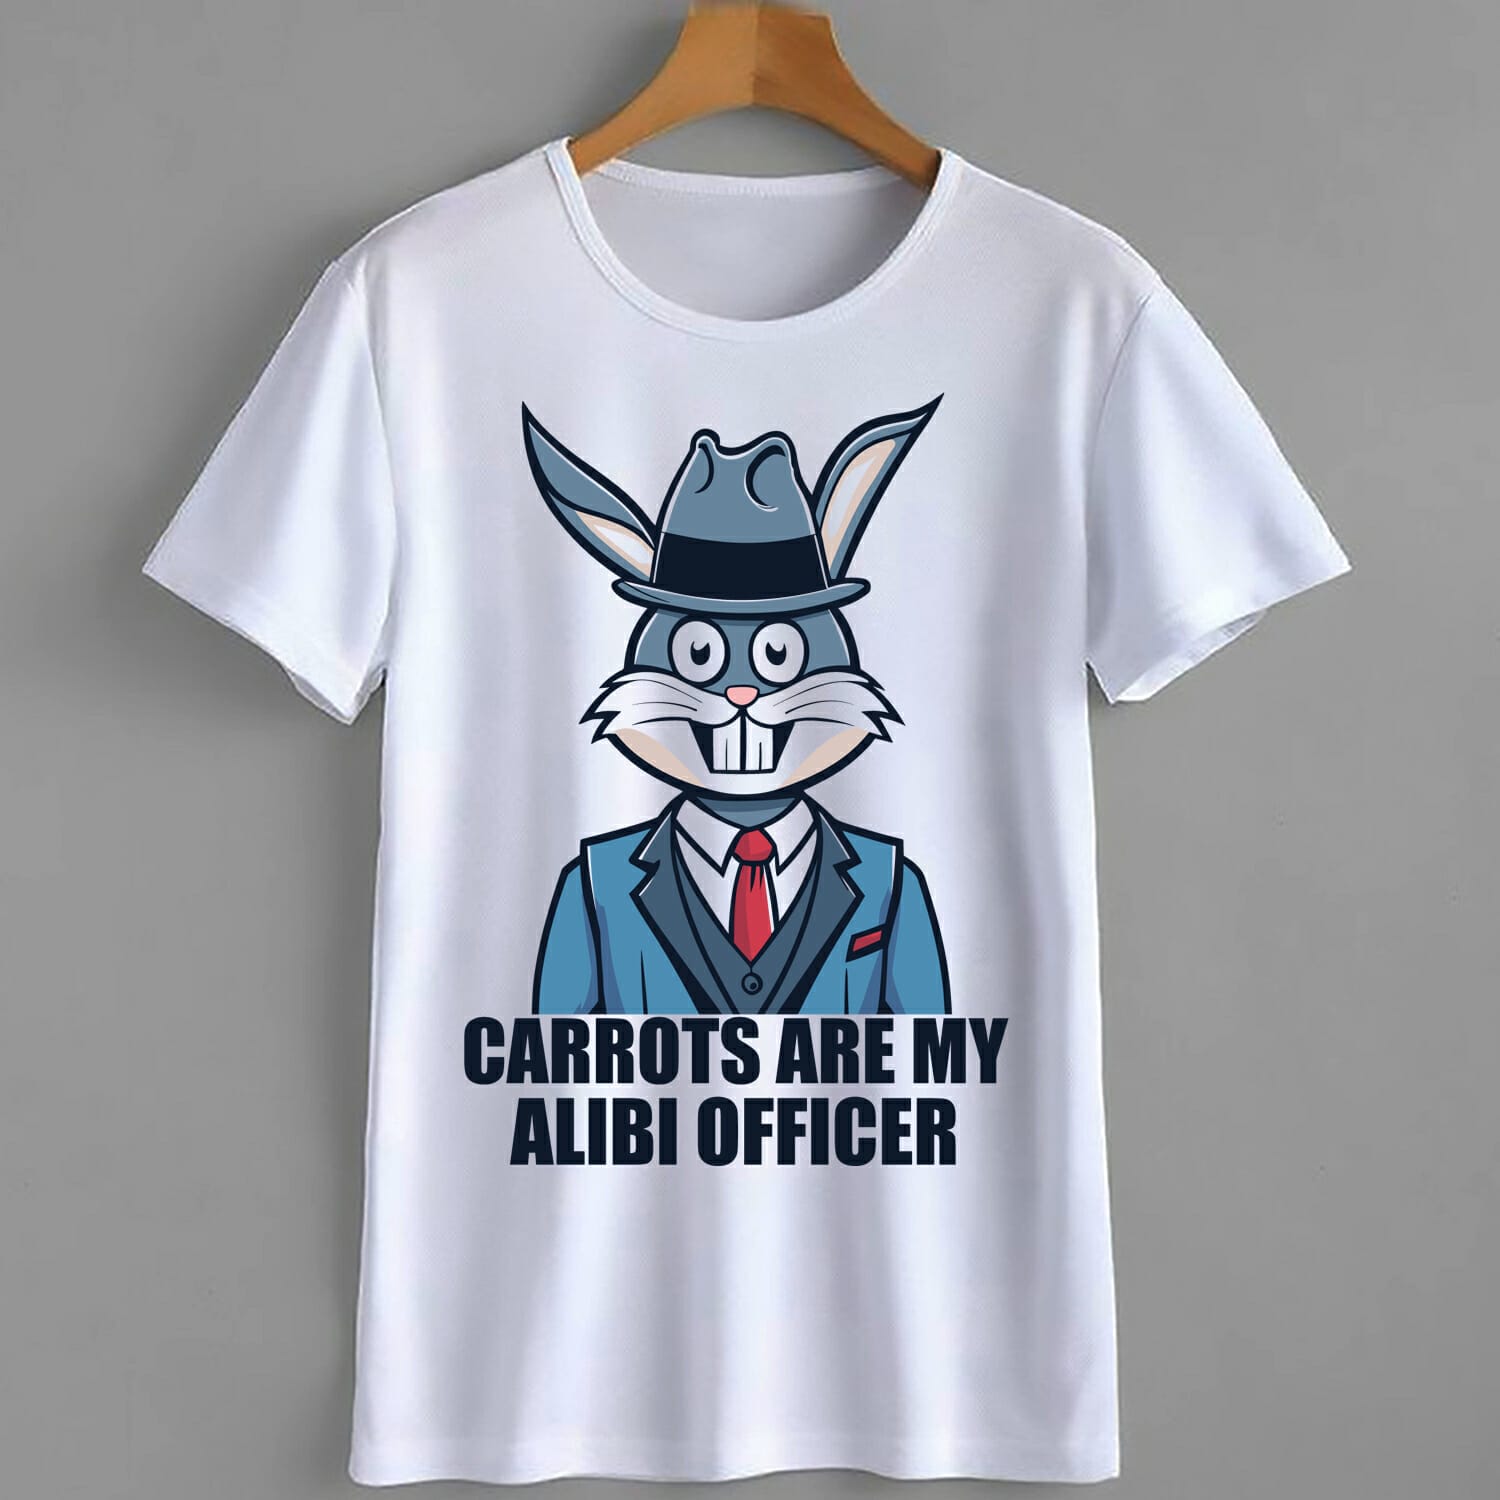 Carrots are my alibi officer